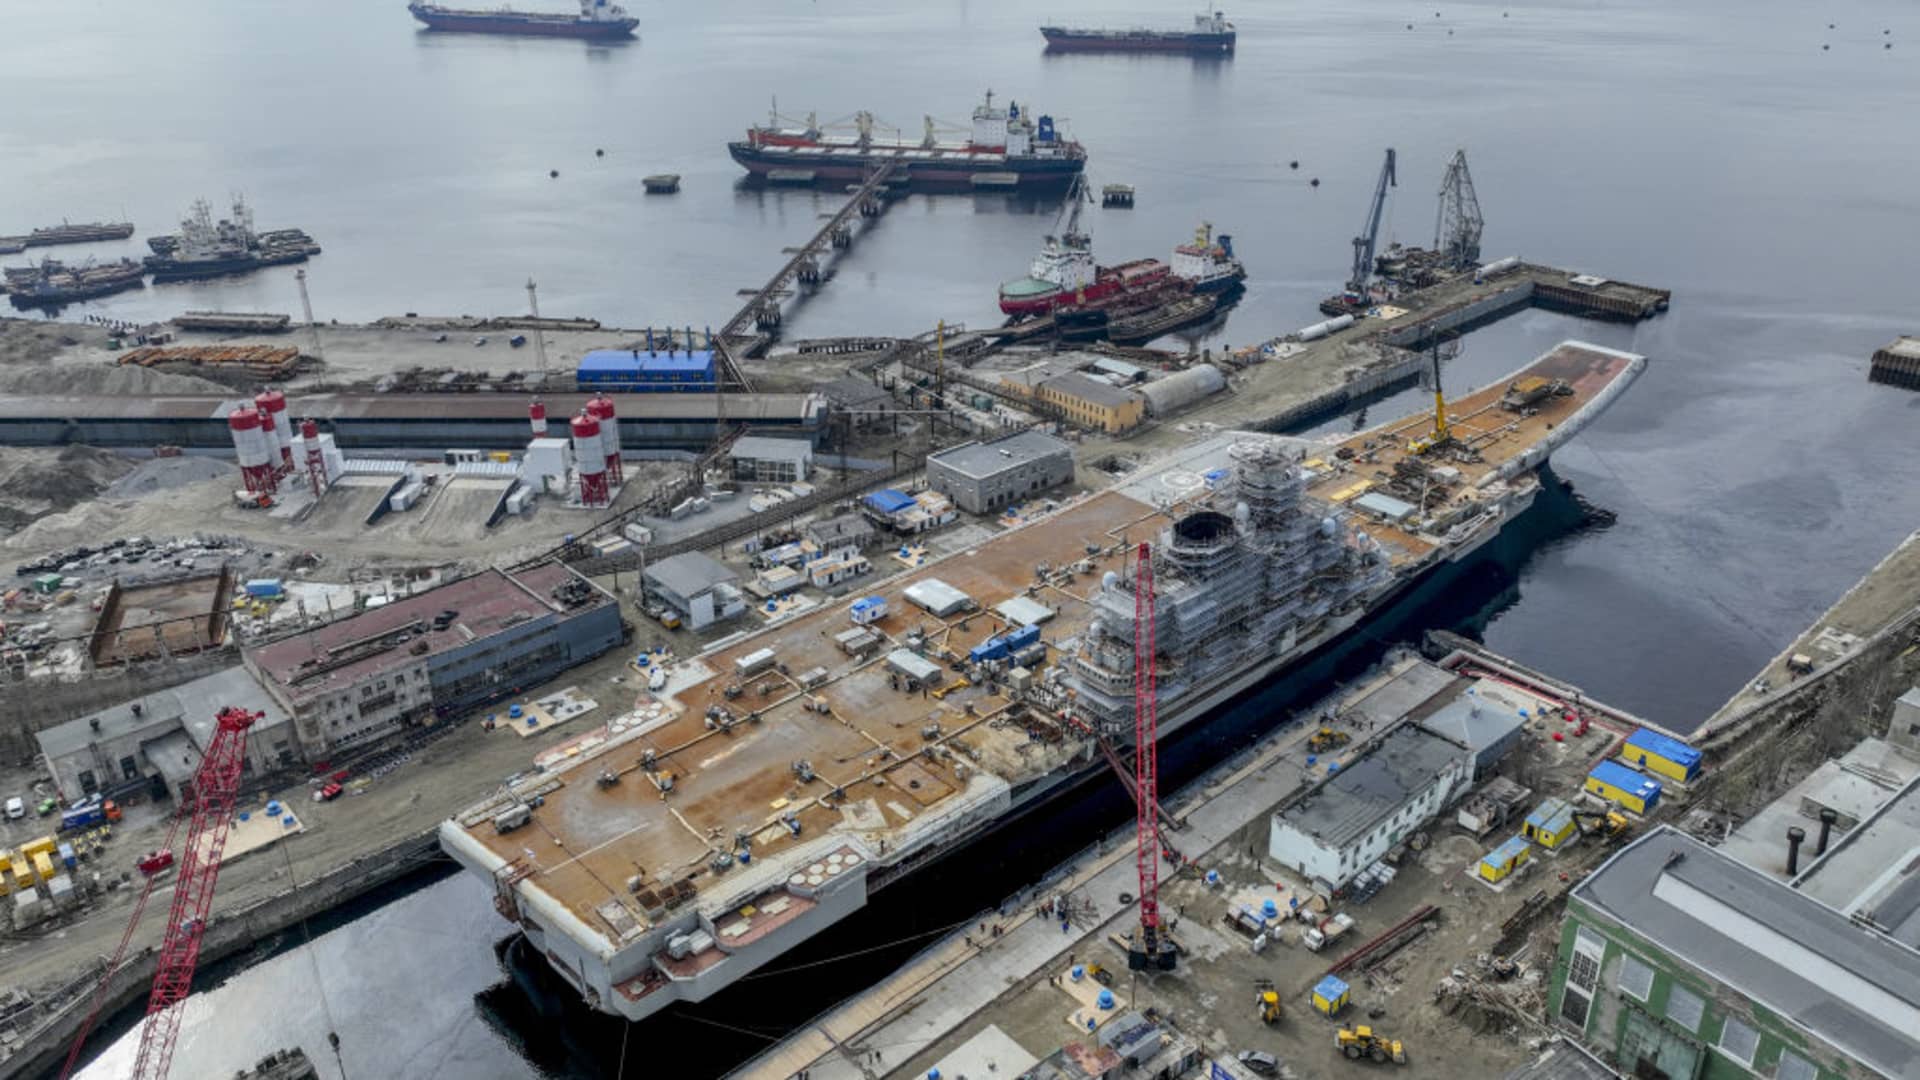 Russian in a shipyard for maintenance and repair works on May 20, 2022. Russia is conducting a week-long series of exercises in the Pacific Ocean involving more than 40 ships and up to 20 aircrafts, Reuters cited Russian news agencies quoting the defense ministry.